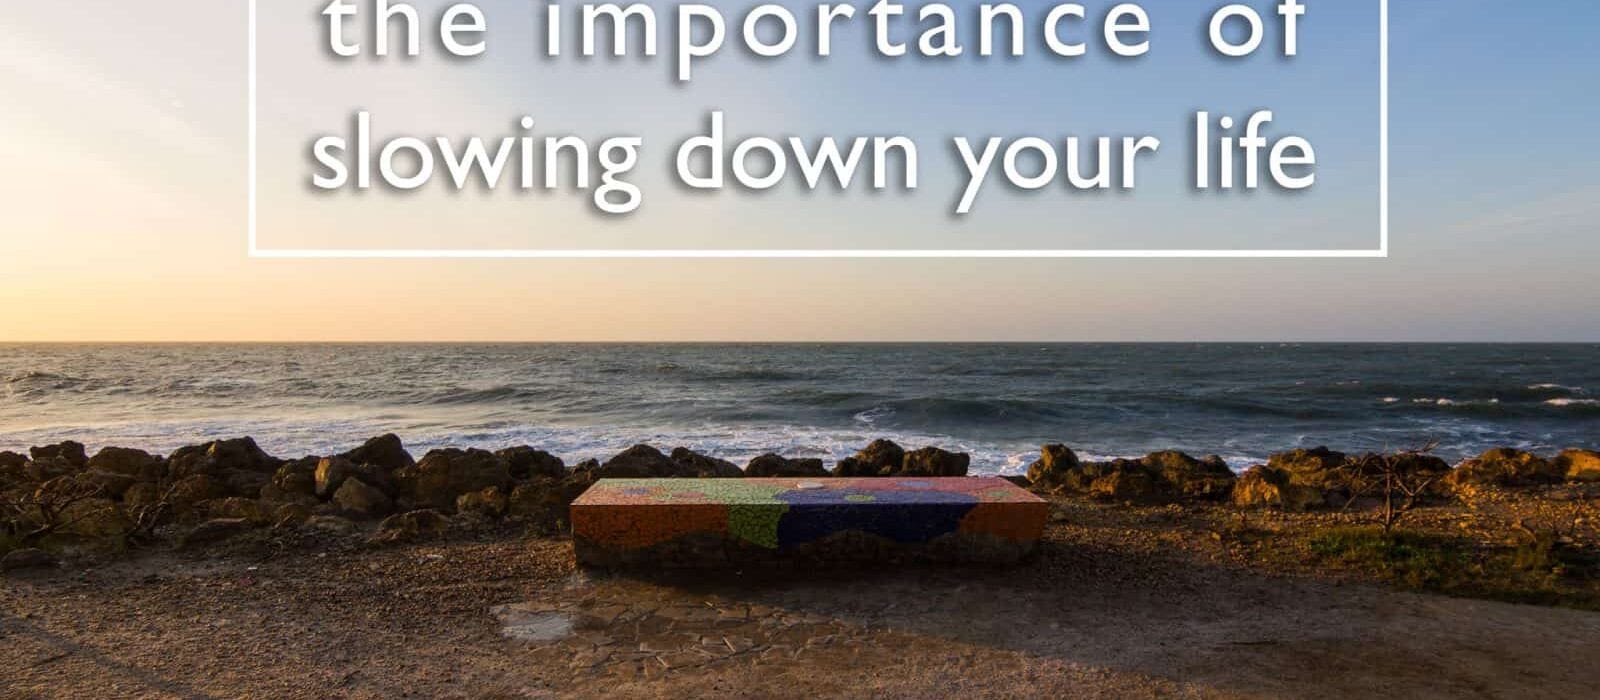 The Importance of Slowing Down Your Life